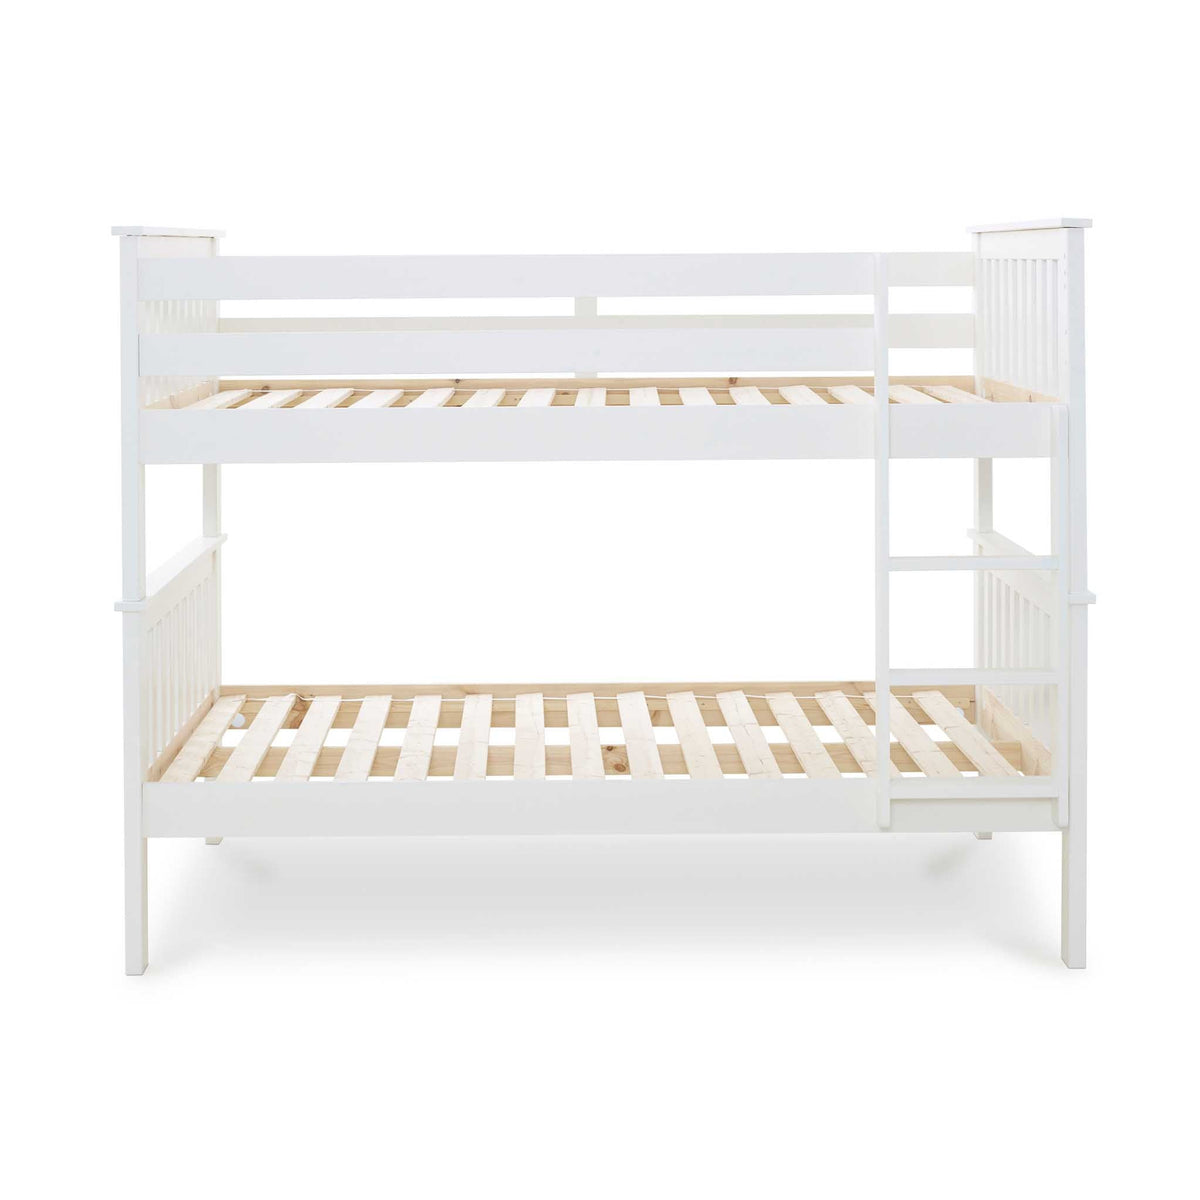 side view of the Quad 4 Sleeper Small Double Bunk Bed